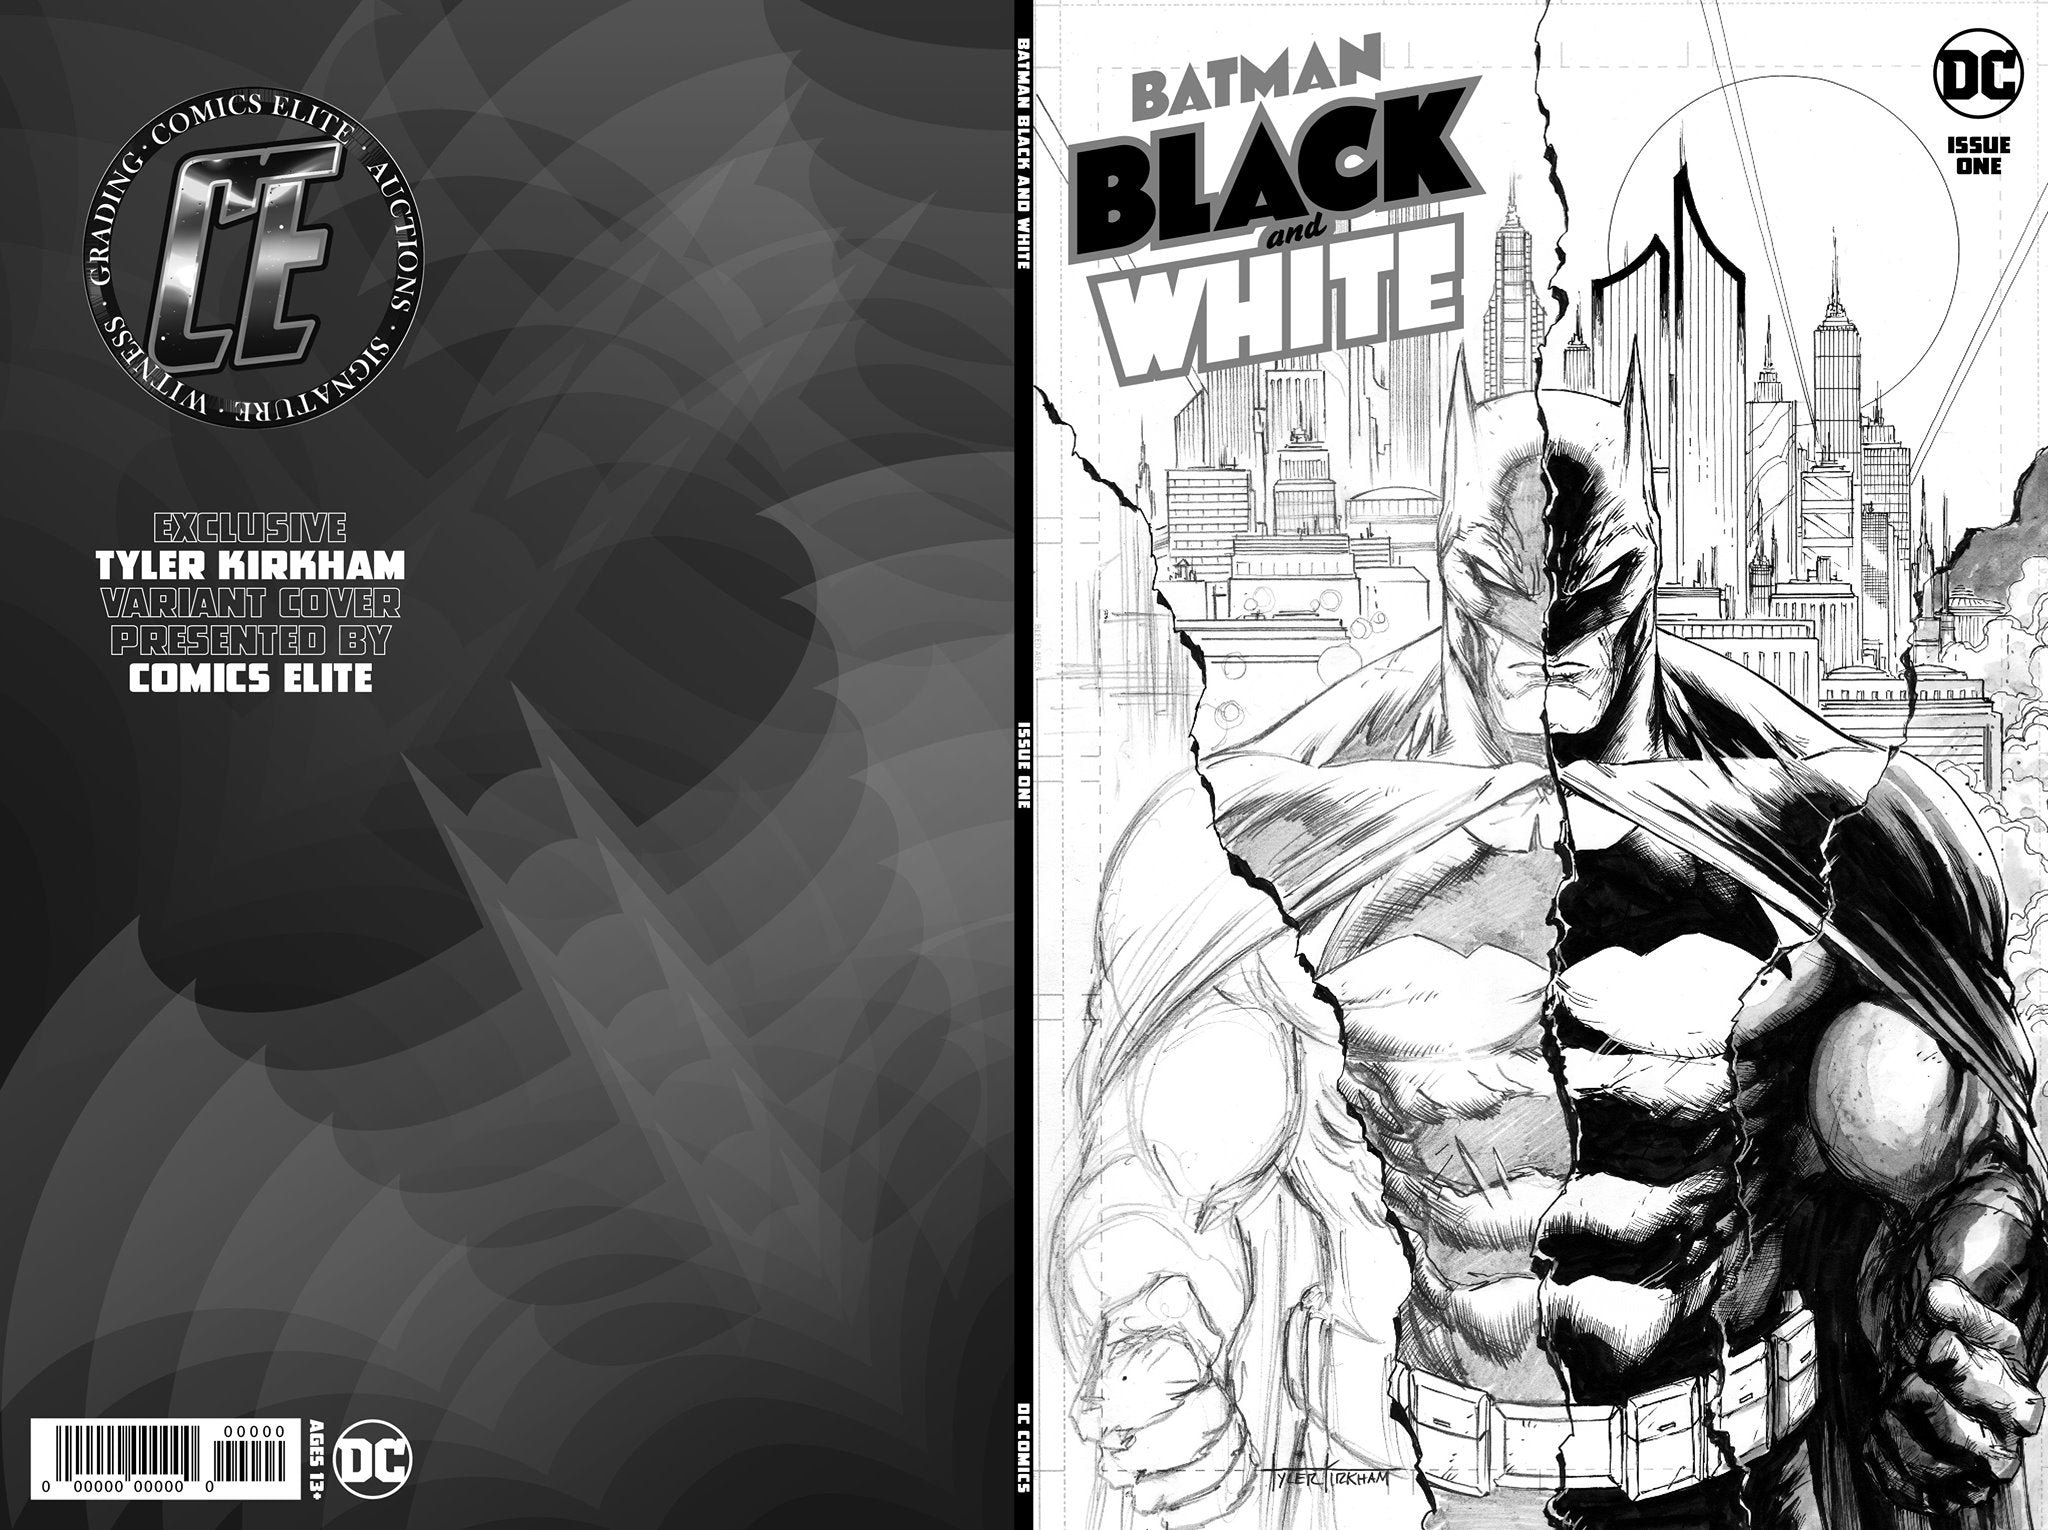 BATMAN BLACK AND WHITE #1 - LIMITED VARIANT COVER BY TYLER KIRKHAM –  Collectors Choice Comics